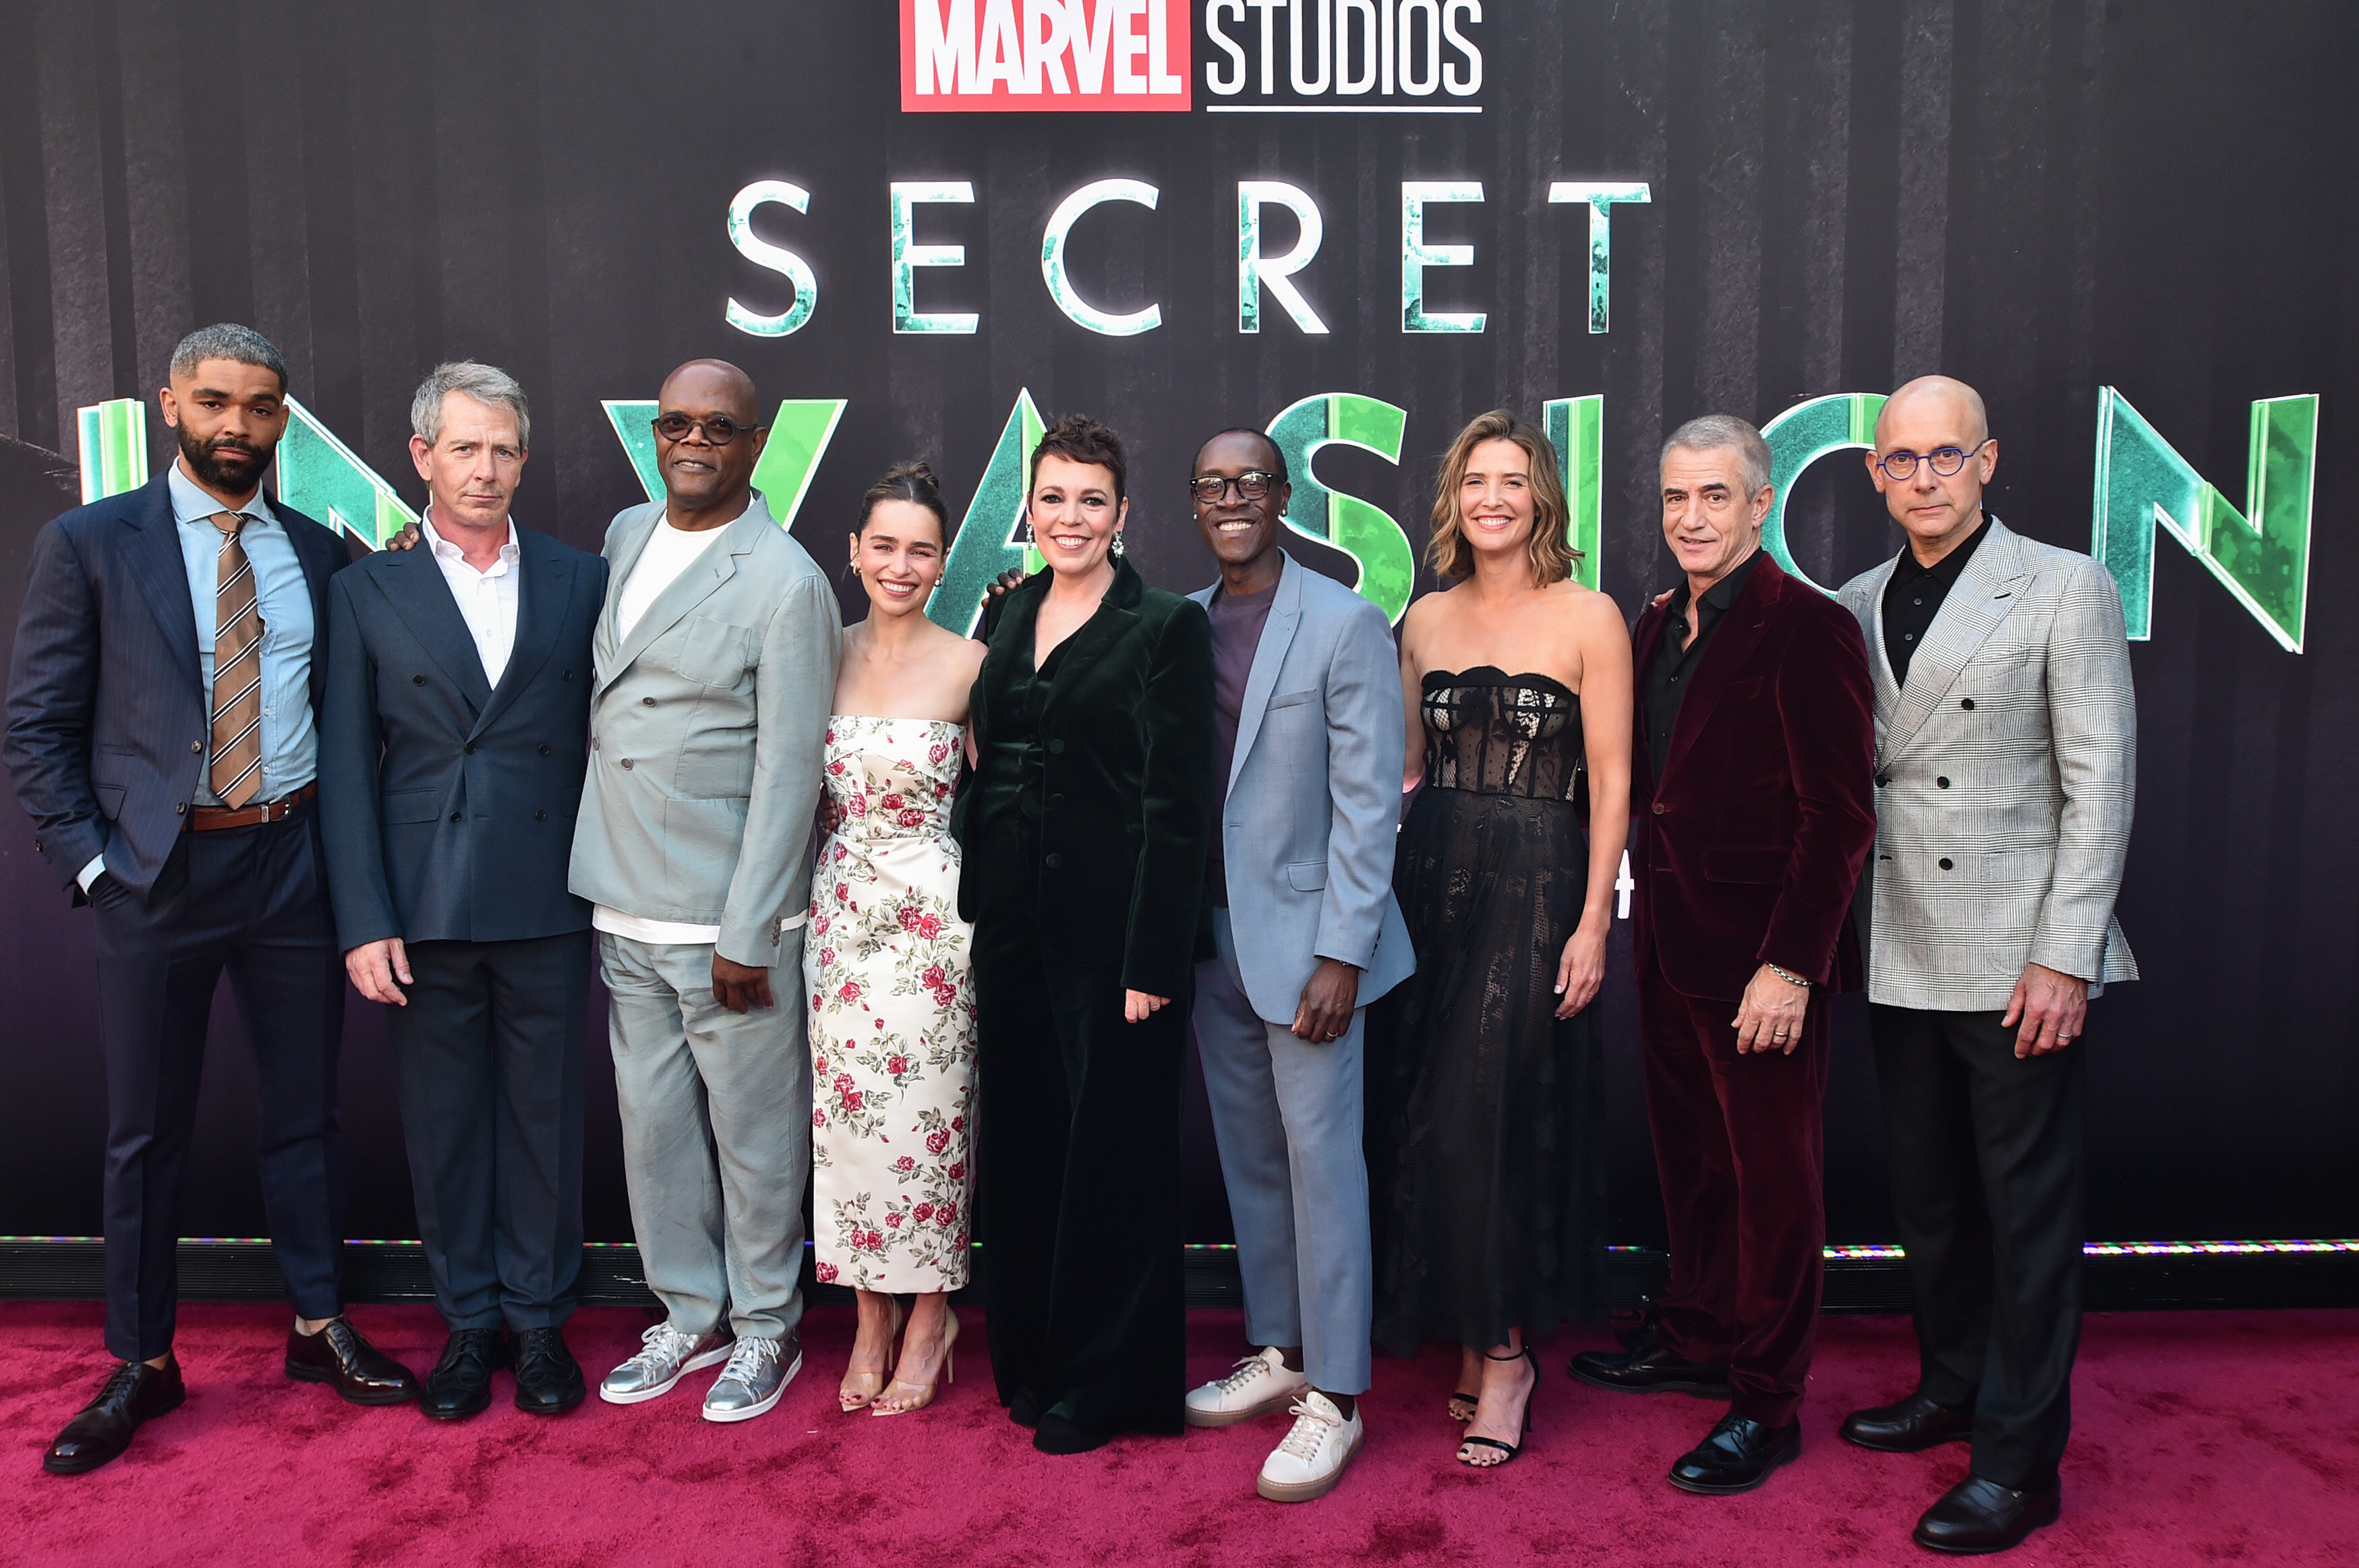 All Cast and Characters Confirmed for Secret Invasion on Disney Plus